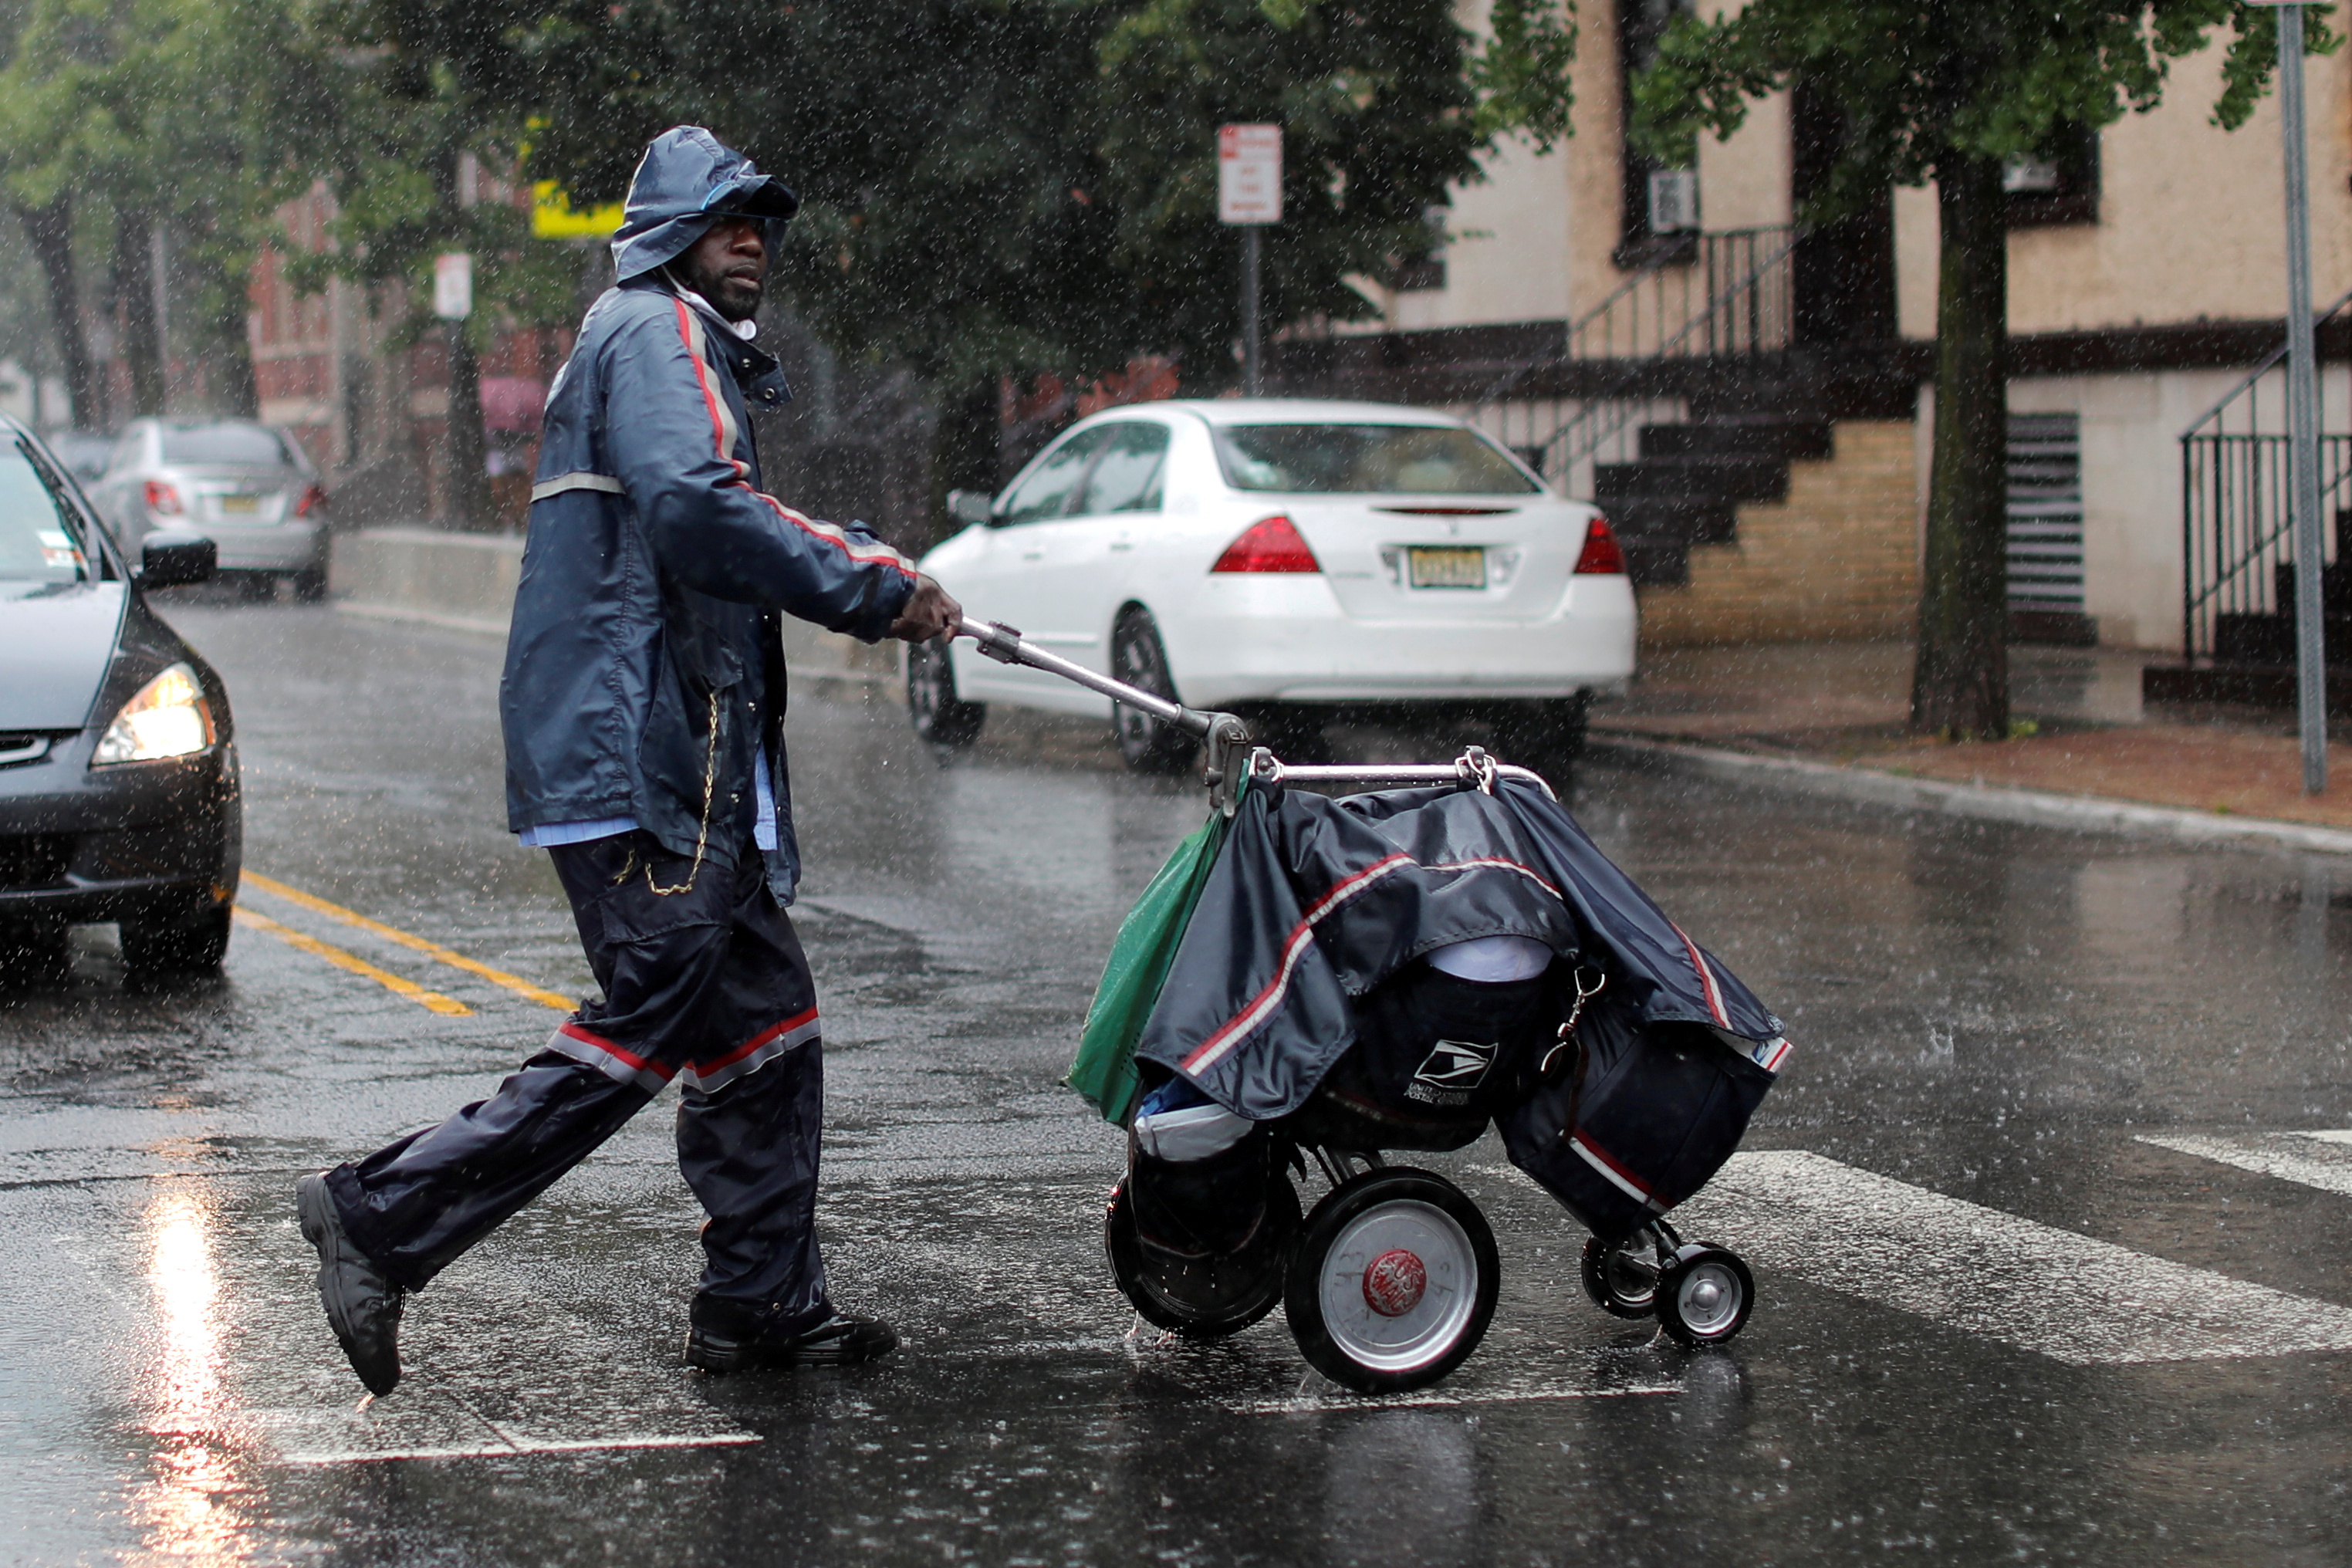 A United States Postal Service (USPS) mail carrier walks through heavy rain in Jersey City, New Jersey, U.S., July 10, 2020. REUTERS/Mike Segar/File Photo